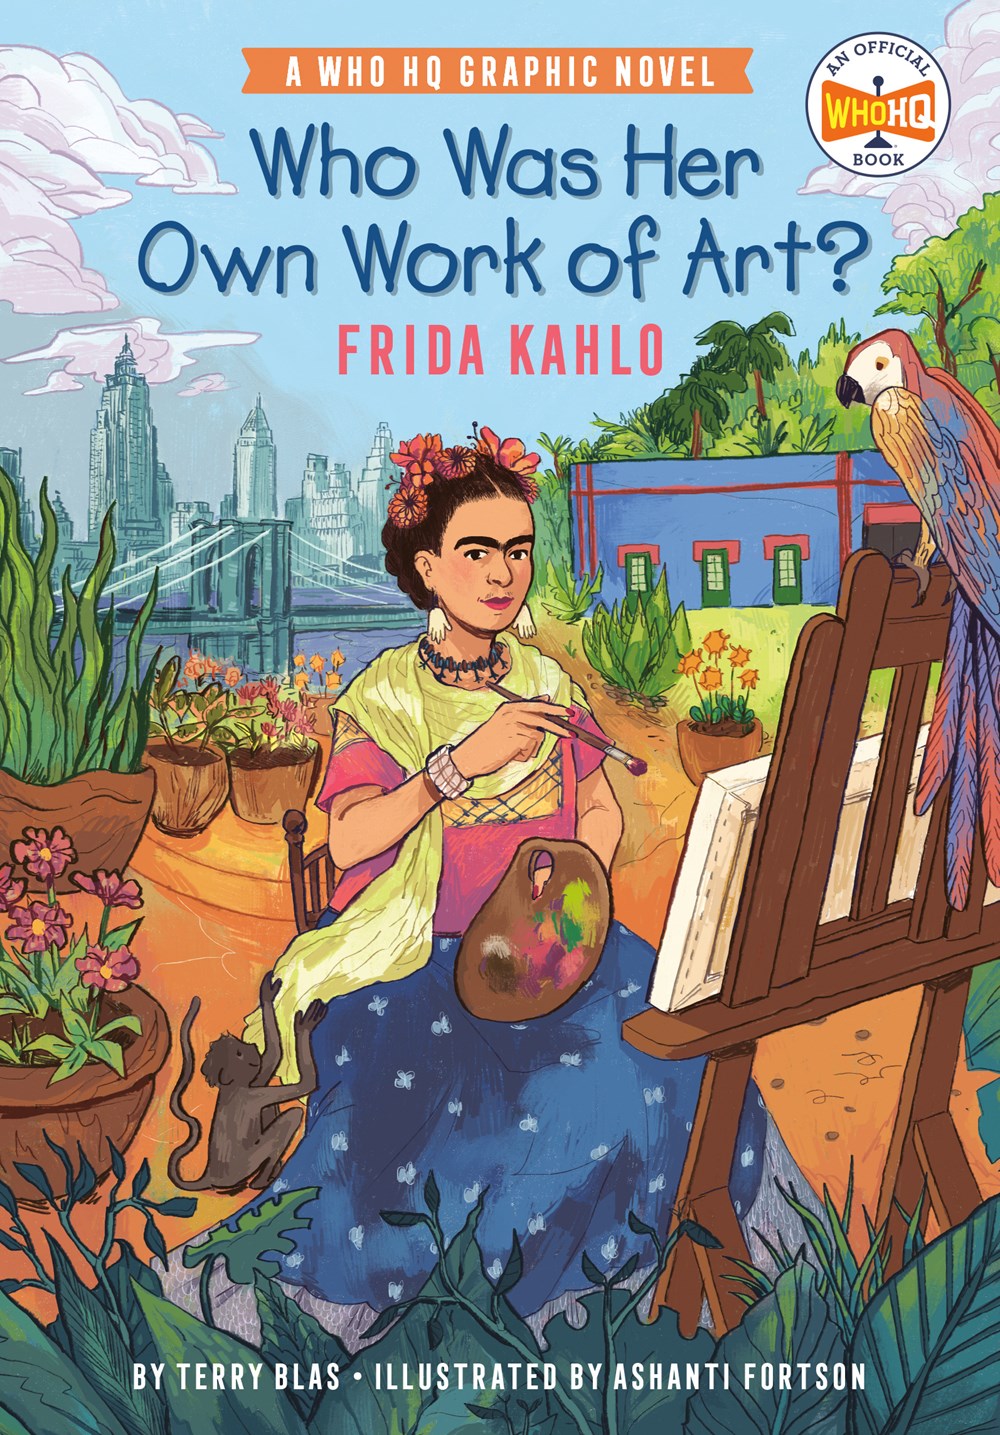 Who Was Her Own Work of Art?: Frida Kahlo : An Official Who HQ Graphic Novel ﻿